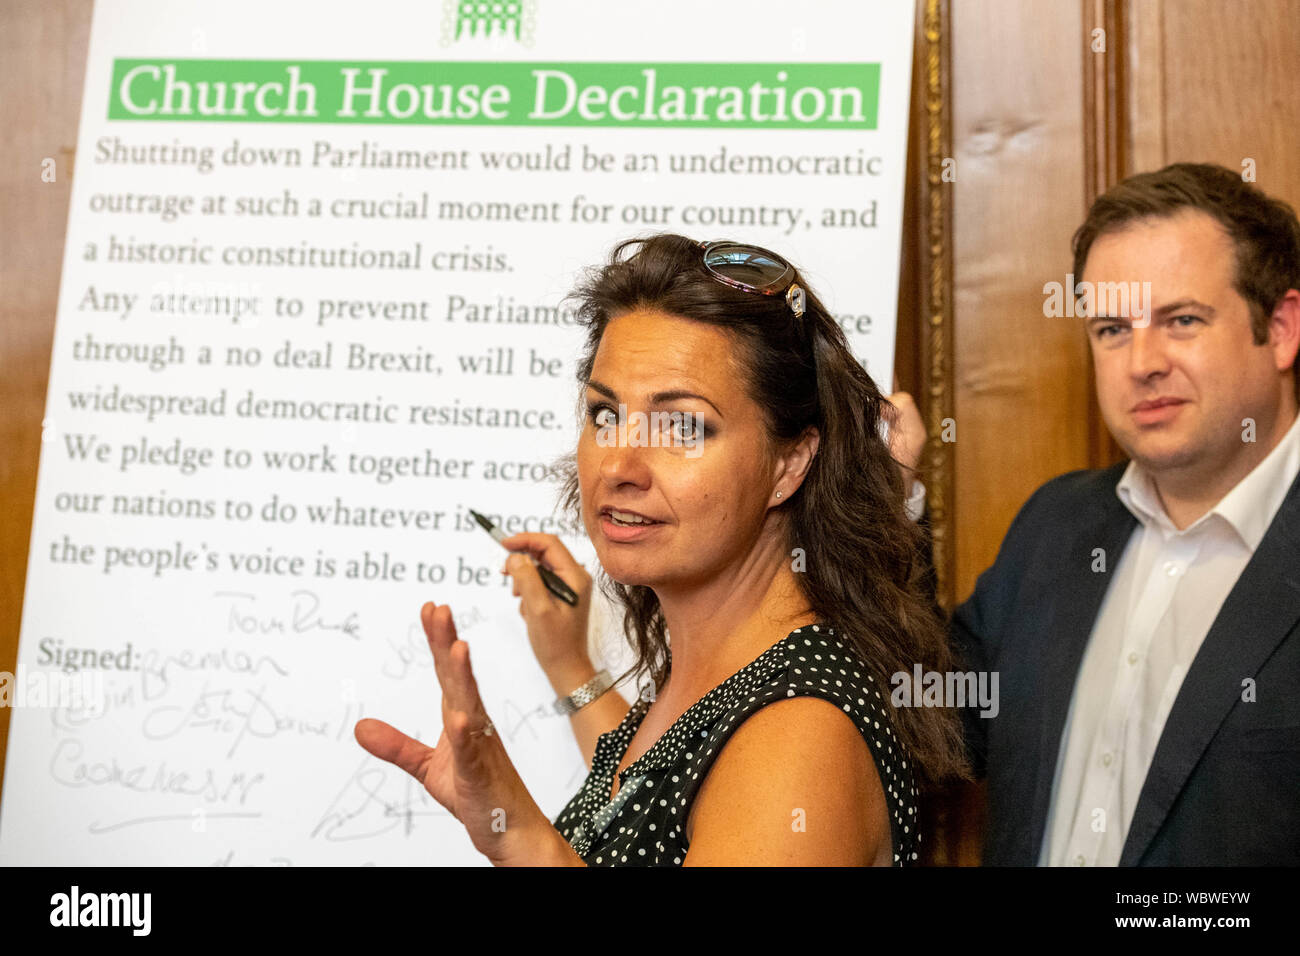 London, UK. 27 August 2019.  Church House declaration meeting of UK opposition leaders and MP's signing a declaration against the shutting down of parliament by Boris Johnson MP PC Prime Minister. Heidi Allen MP signs the Deceleration Credit Ian DavidsonAlamy Live News Stock Photo